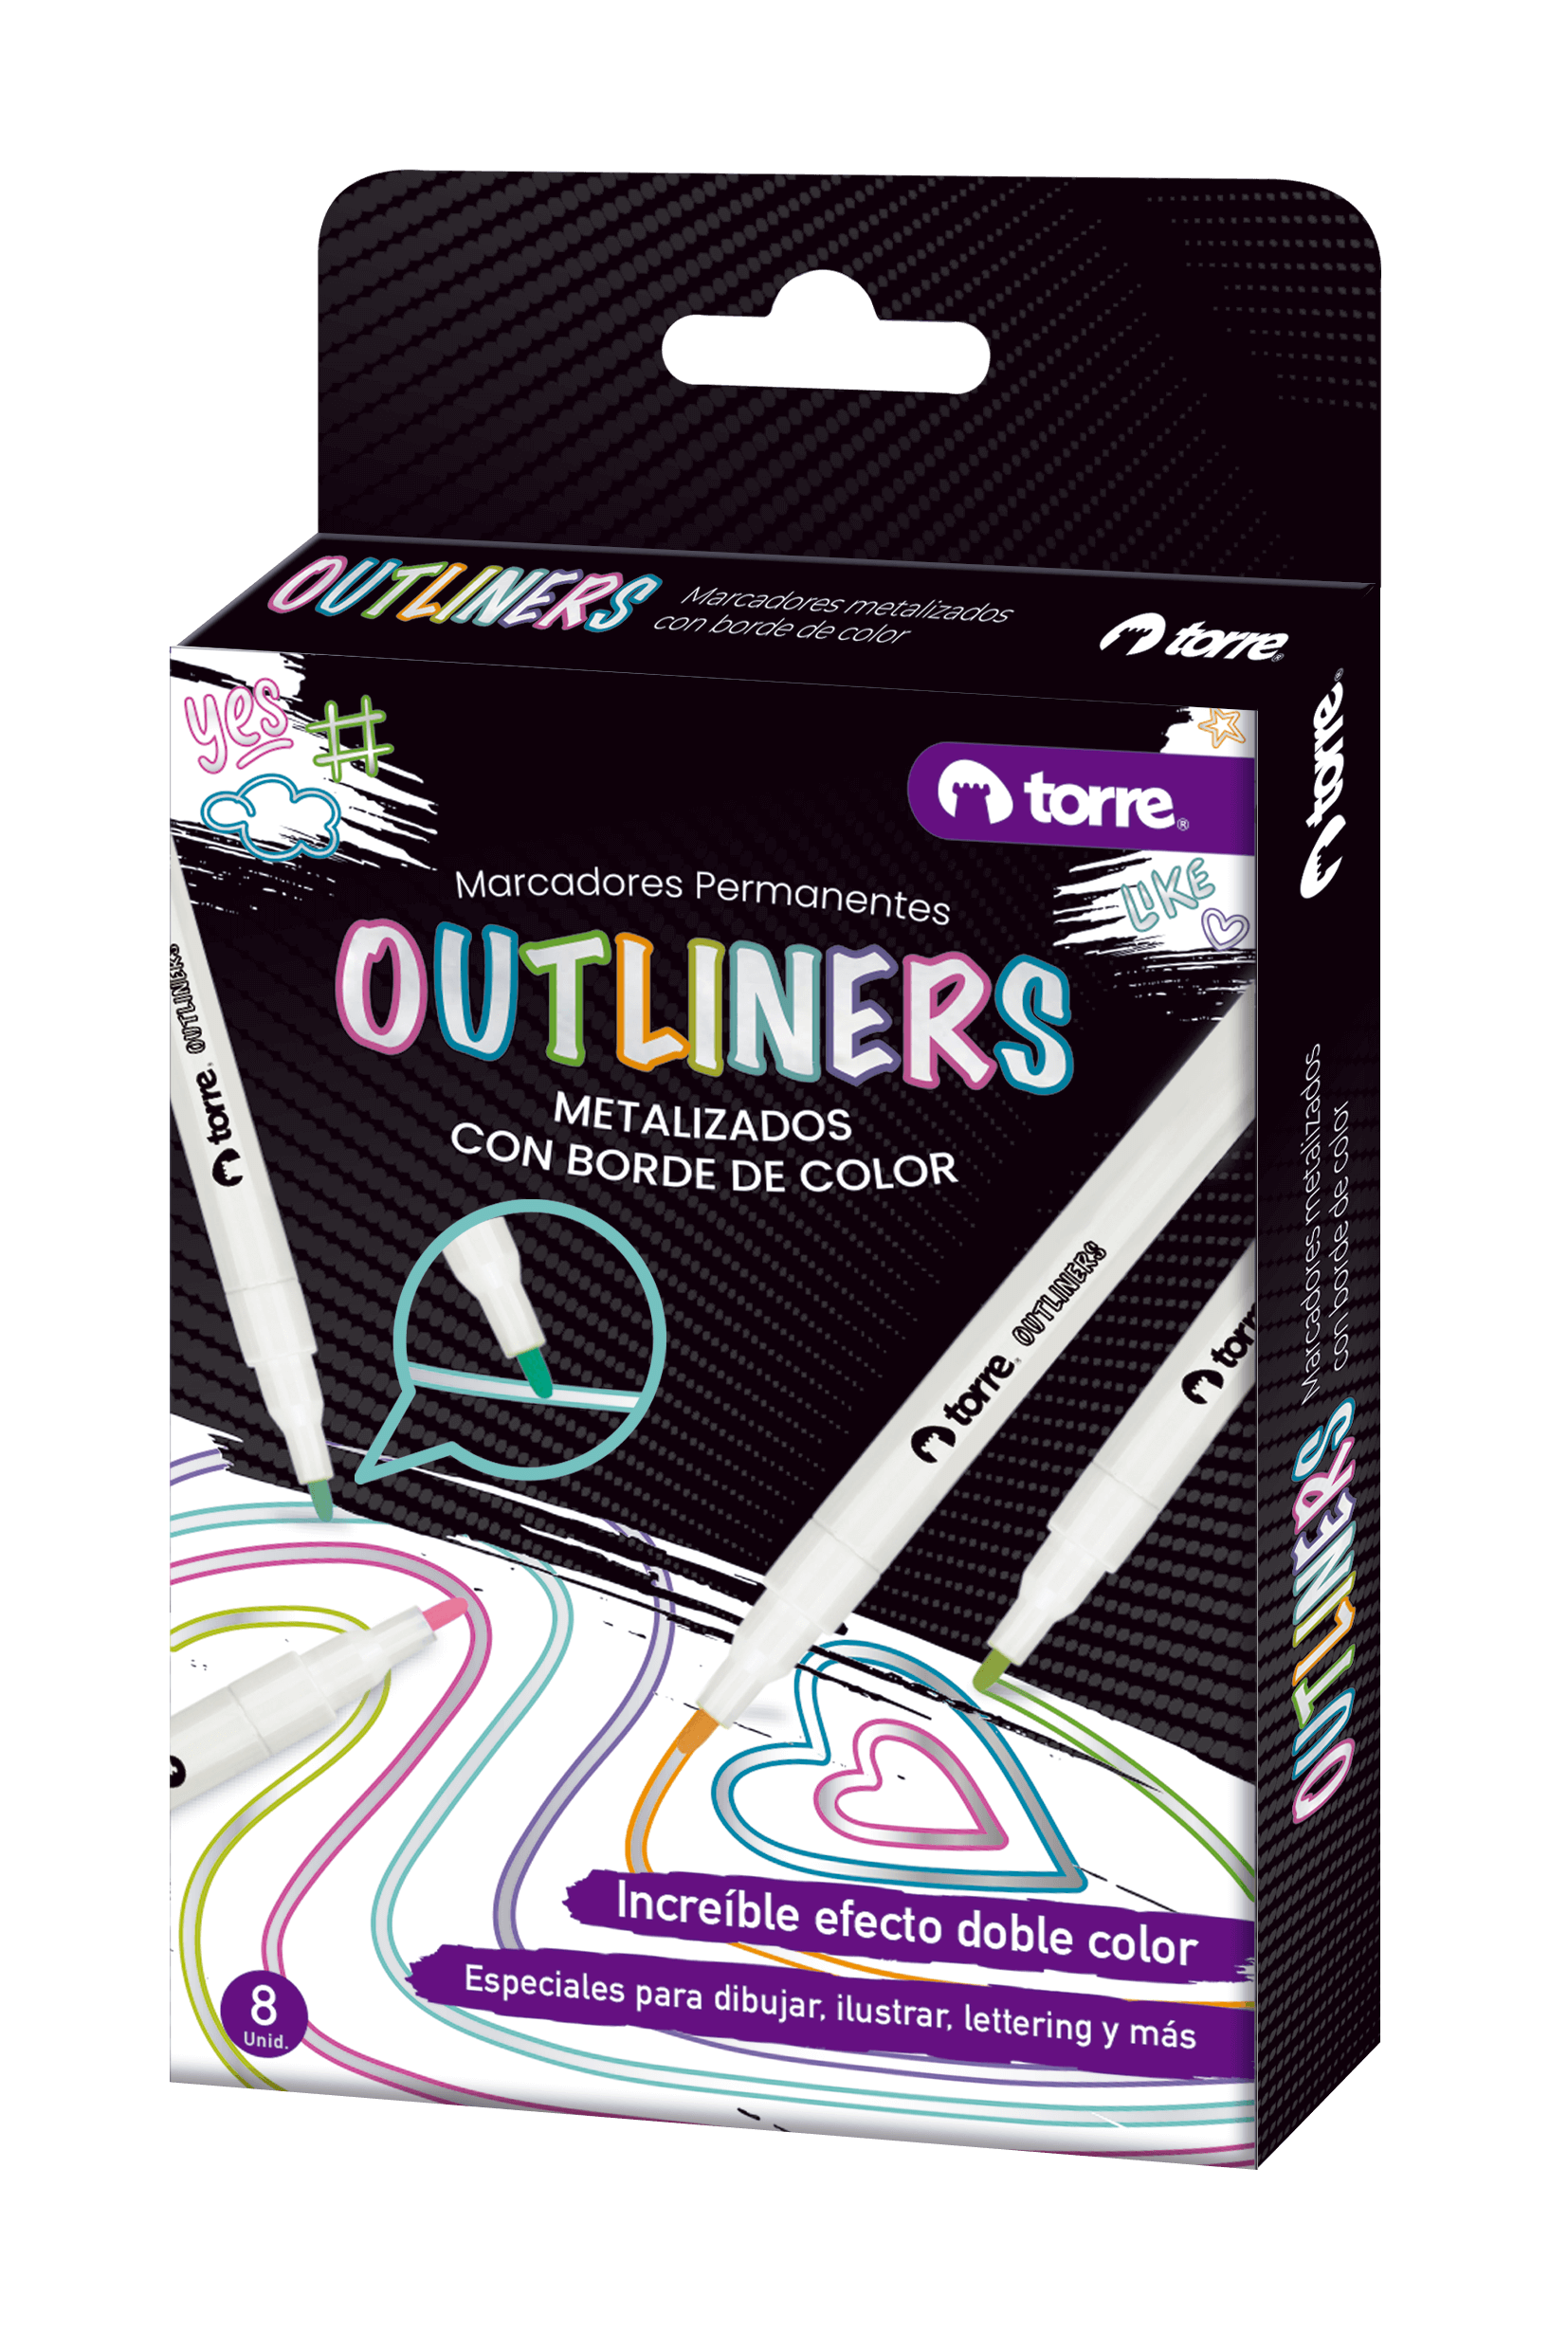 Outliners